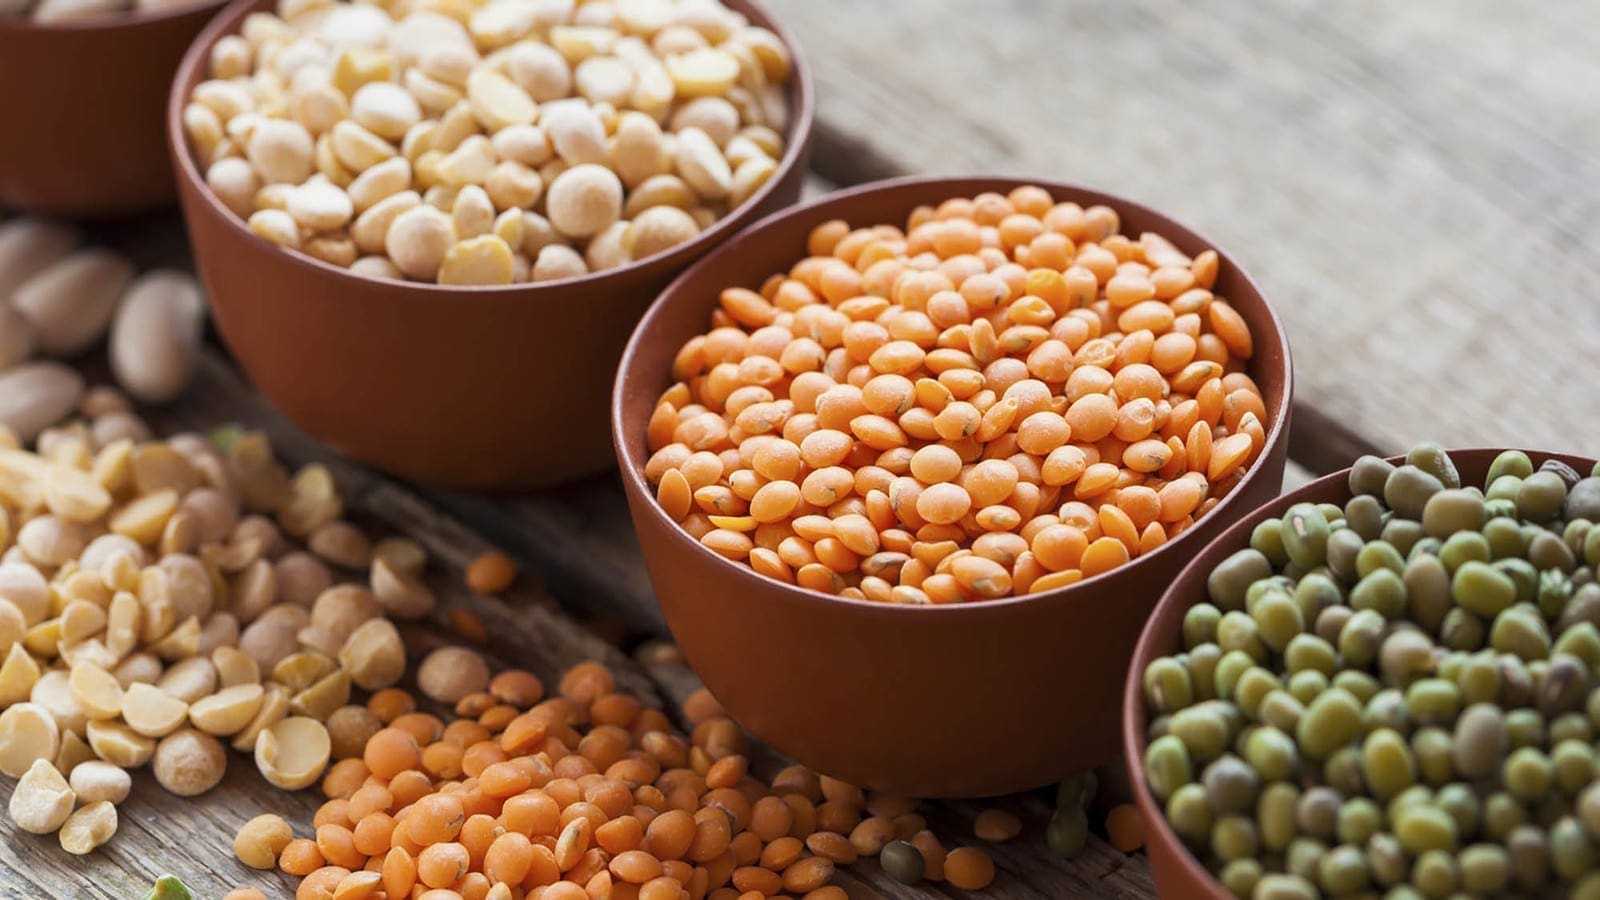 India removes import restrictions on select pulses amid food inflation concerns